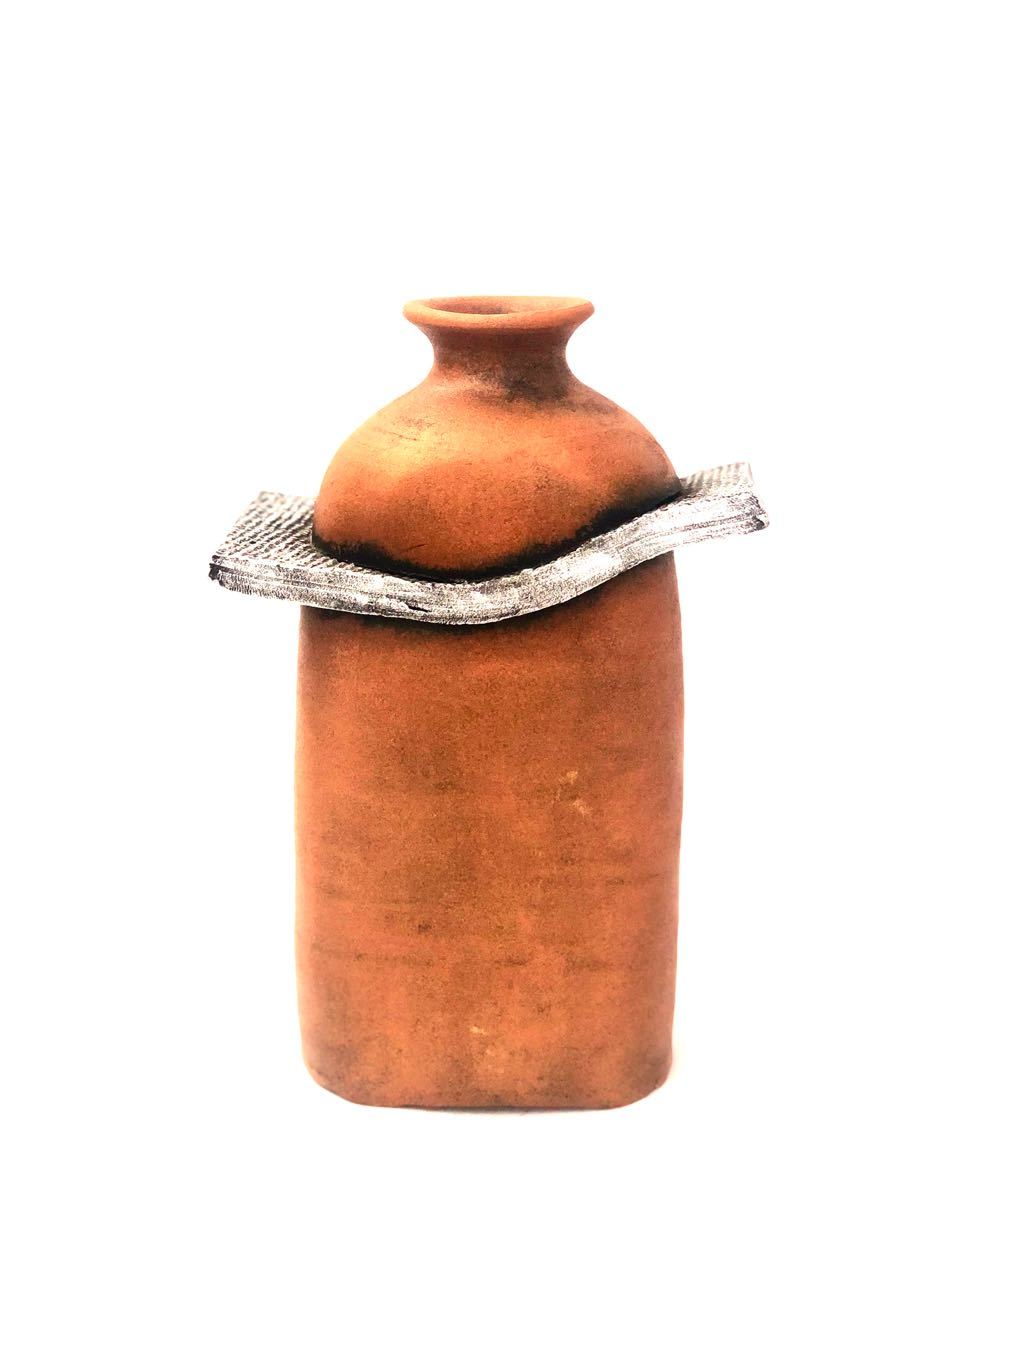 Excellent Artist's Representation Of Clay Pottery In Terracotta By Tamrapatra